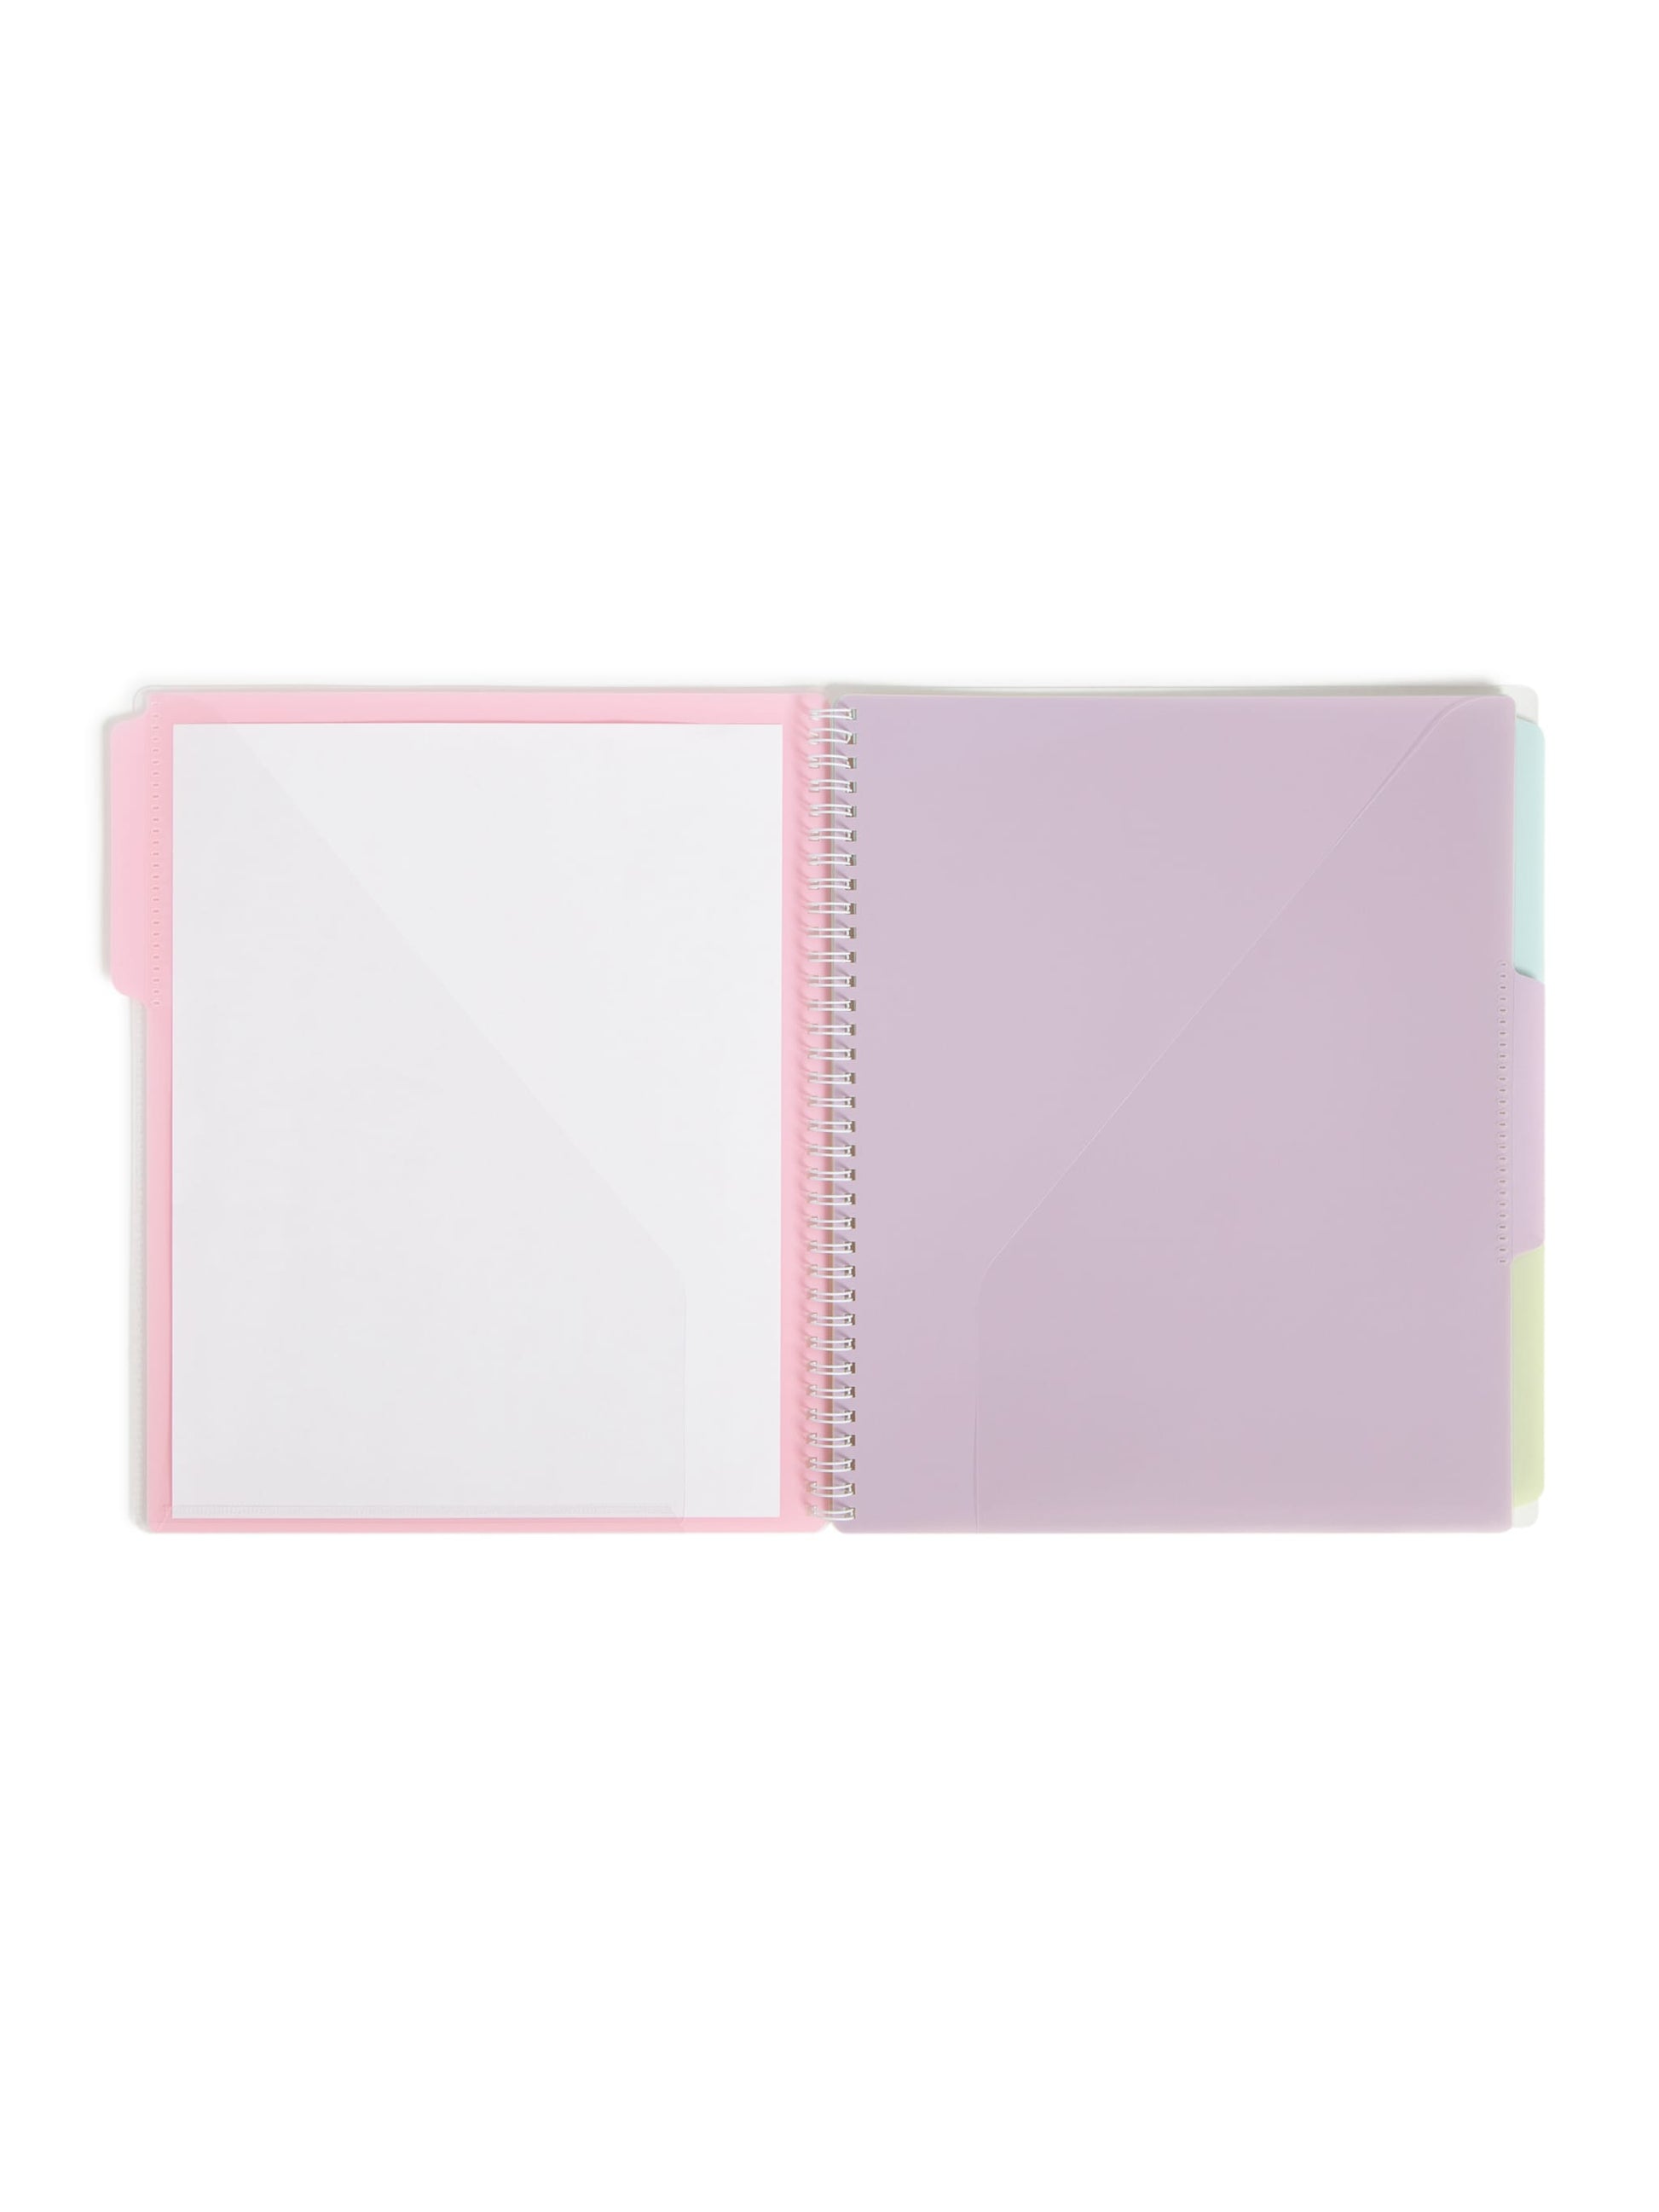 Project Organizer, 12 Pockets, 6 Dividers, 1/3-Cut Tab, Assorted Colors Color, Letter Size, Set of 1, 086486892087